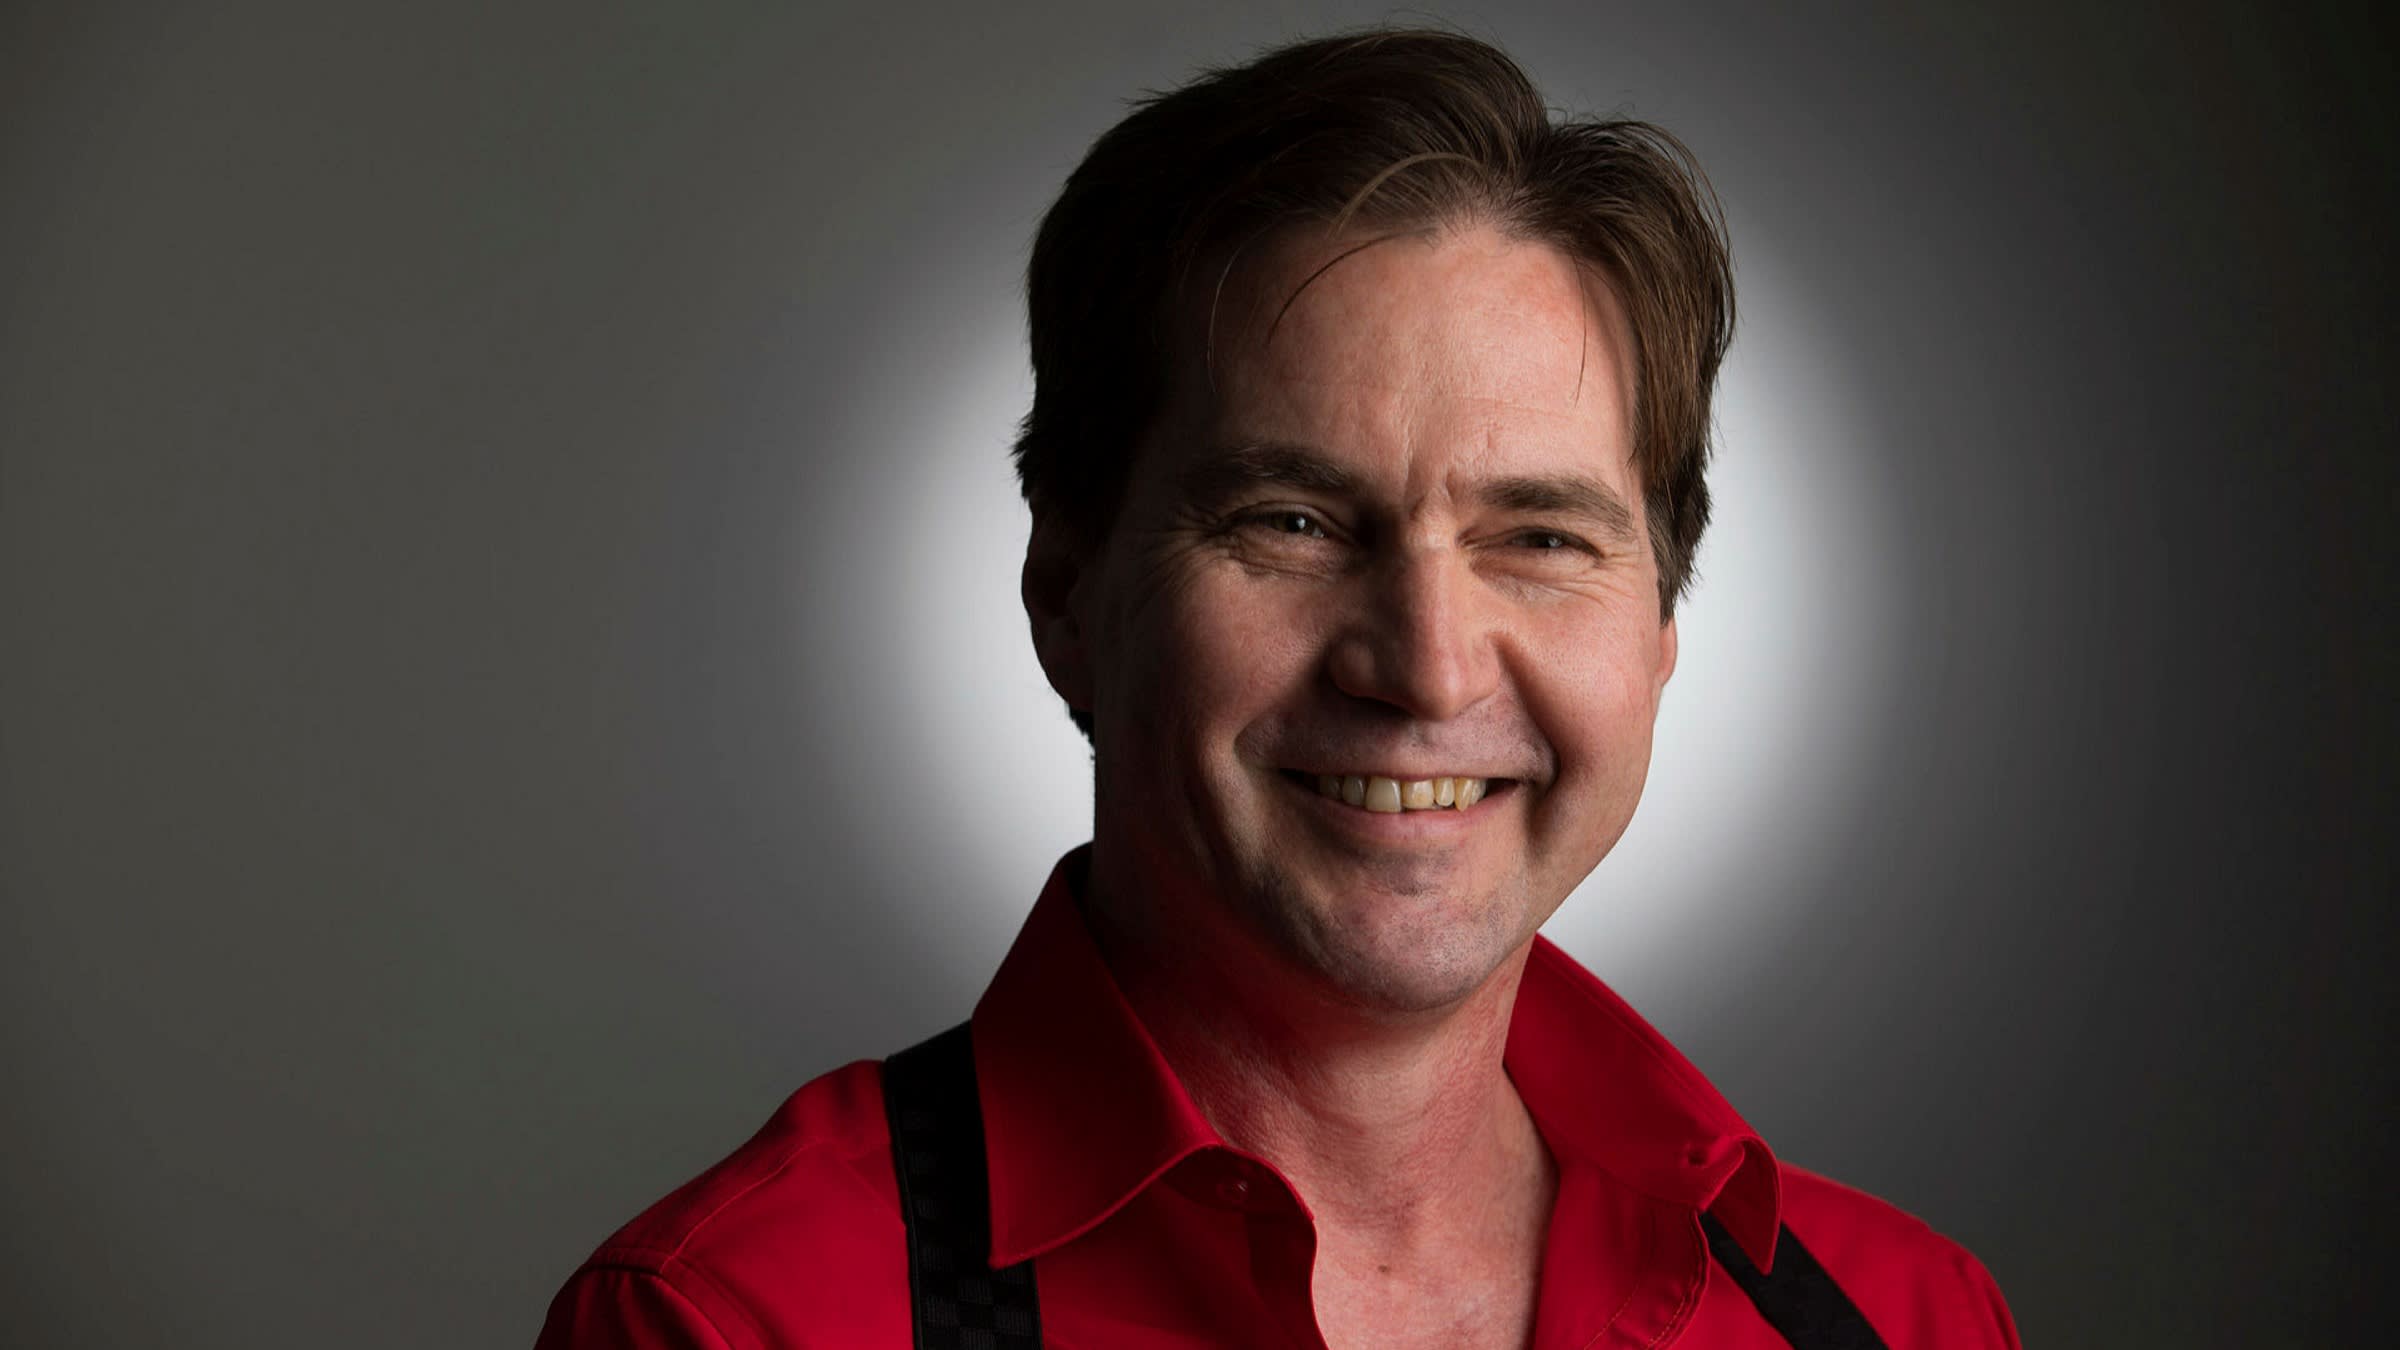 Inside the trial to prove Craig Wright’s claim he invented Bitcoin is a ‘lie’ – DL News